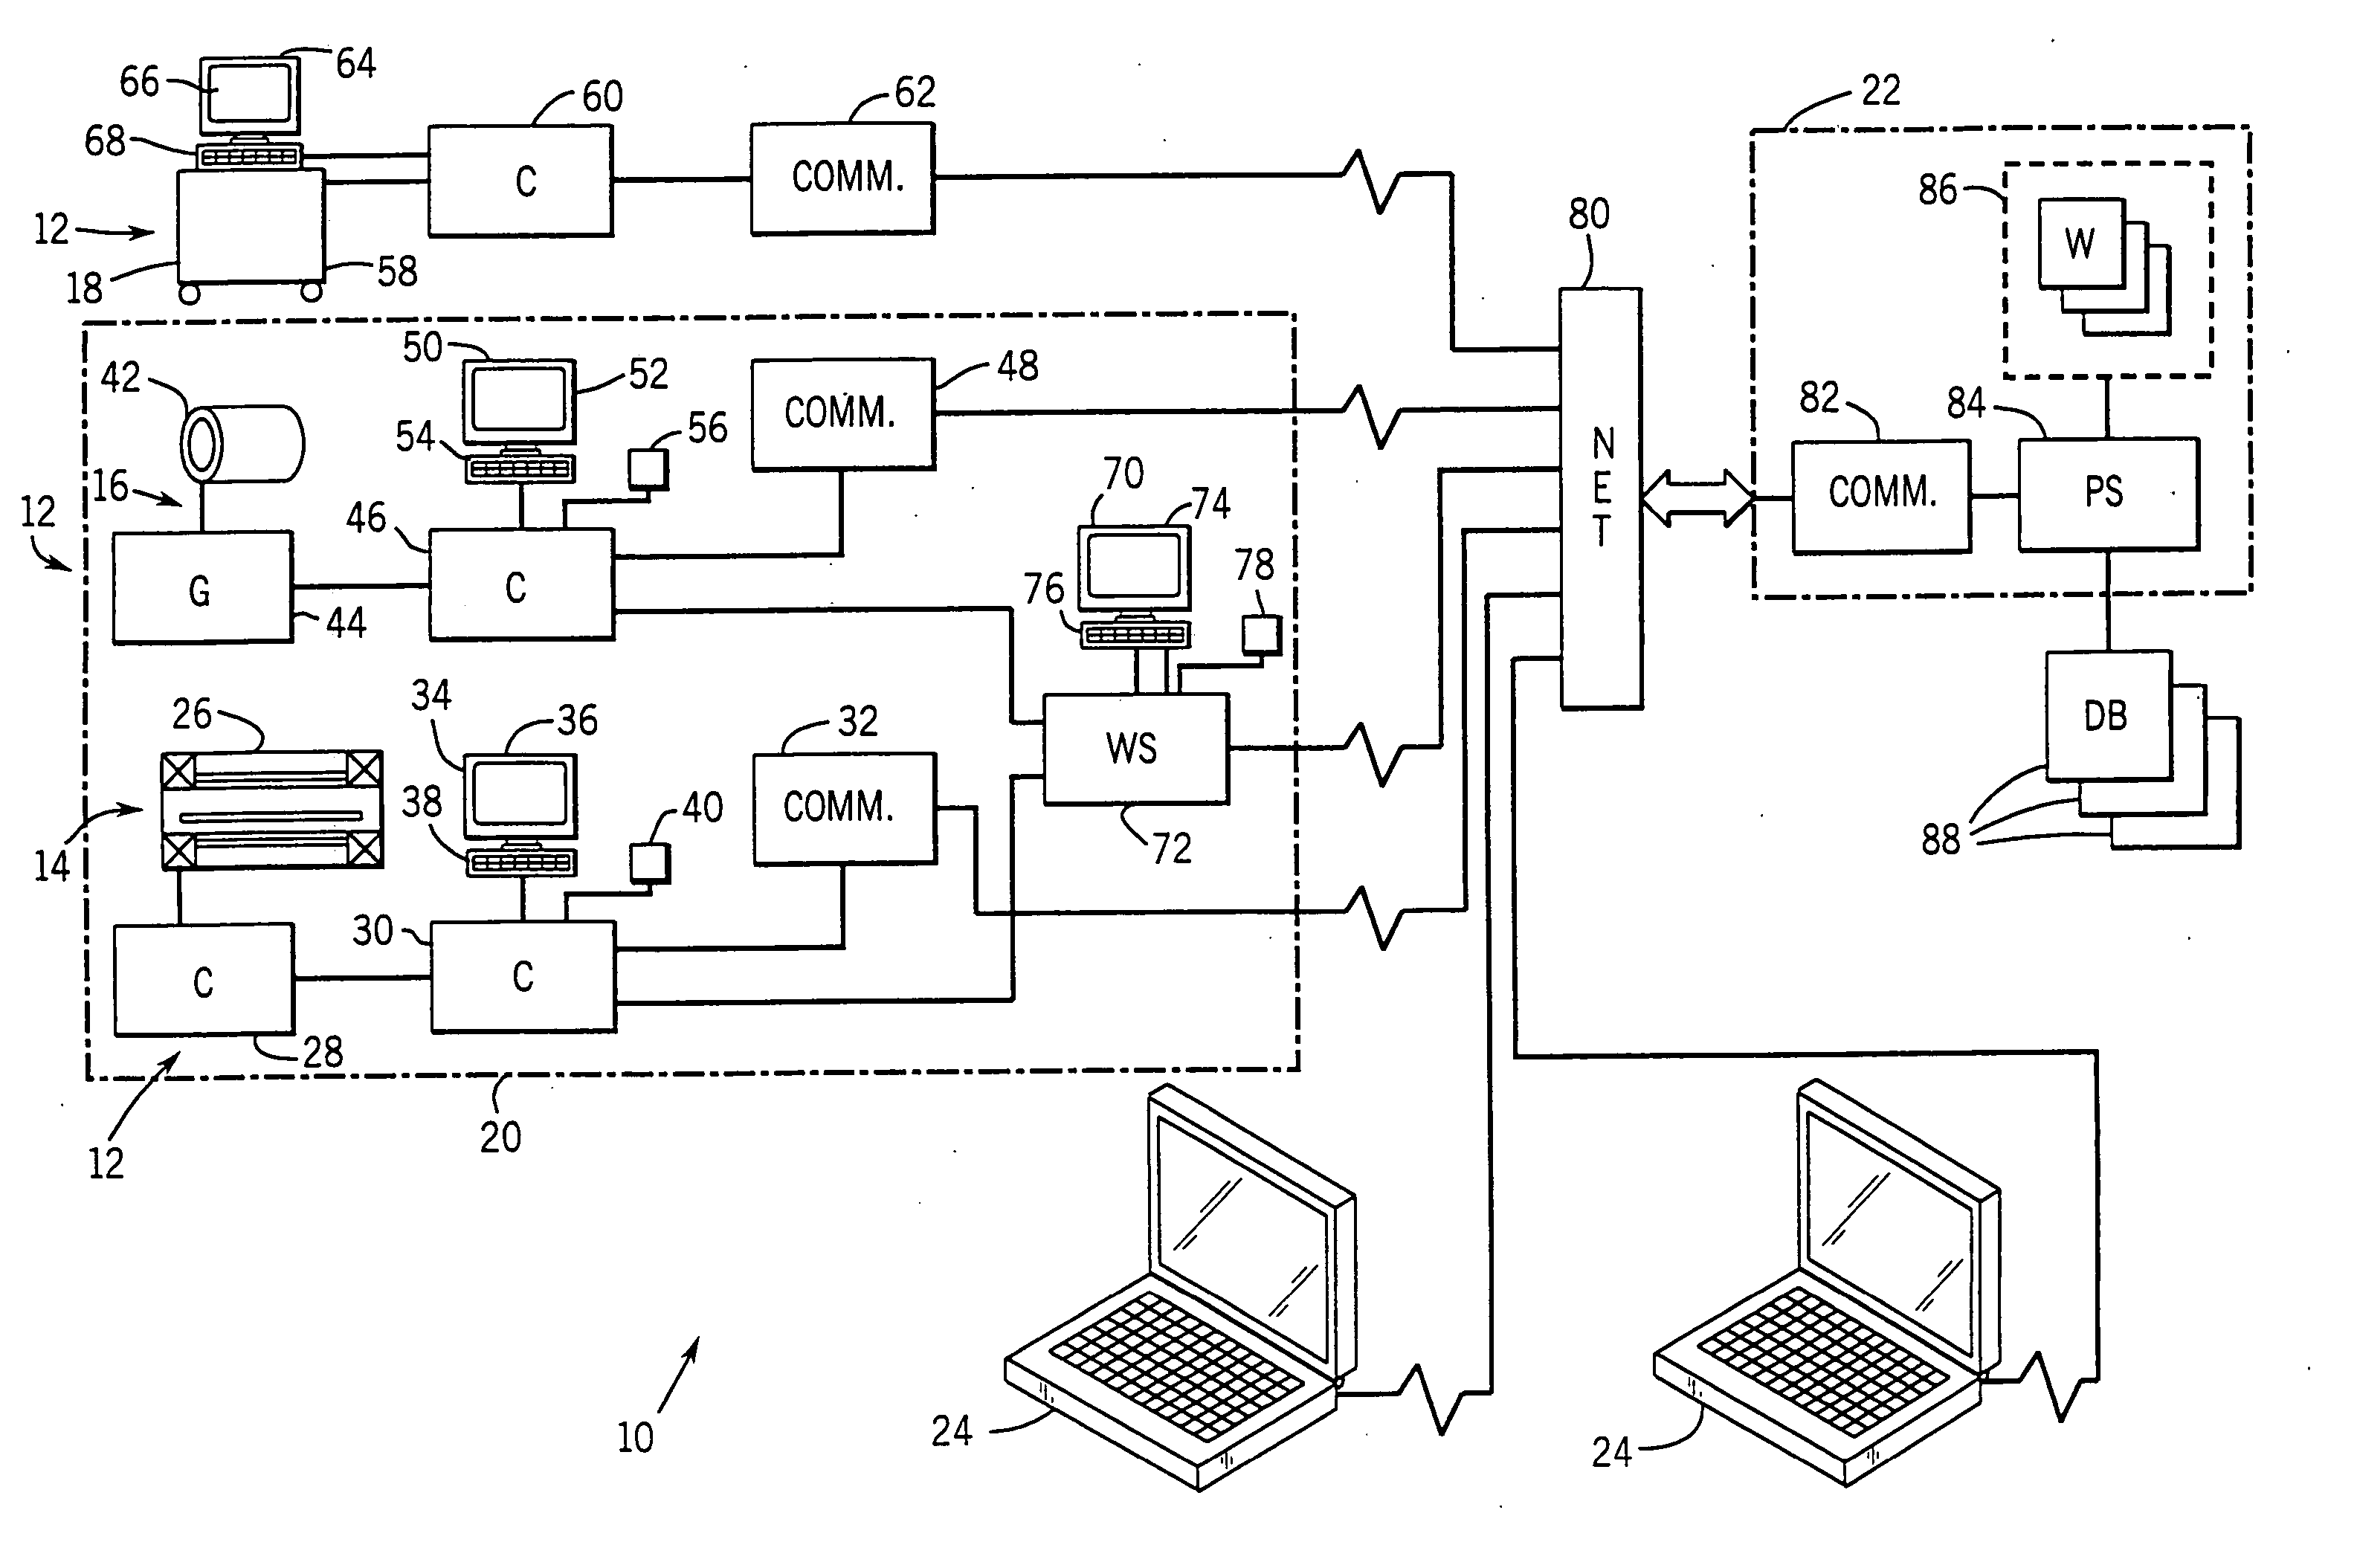 Medical diagnostic system service method and apparatus